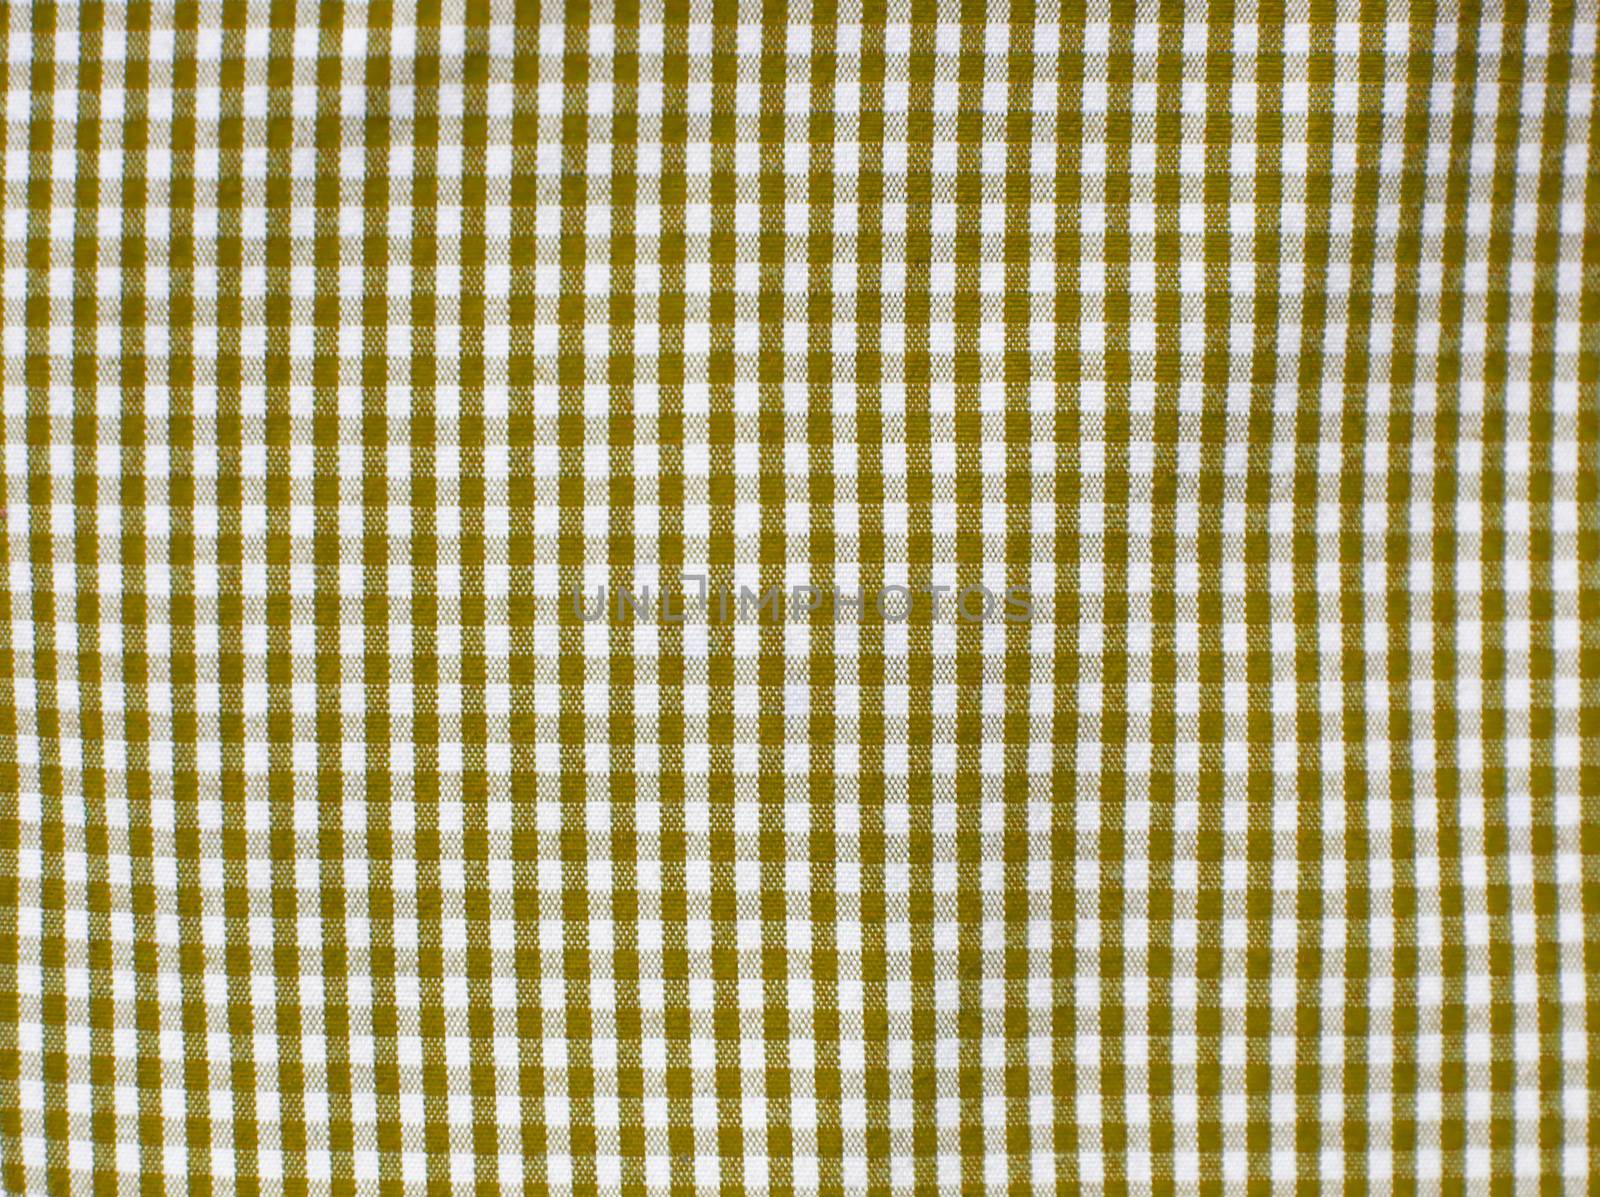 Brown square fabric pattern for background by nuchylee